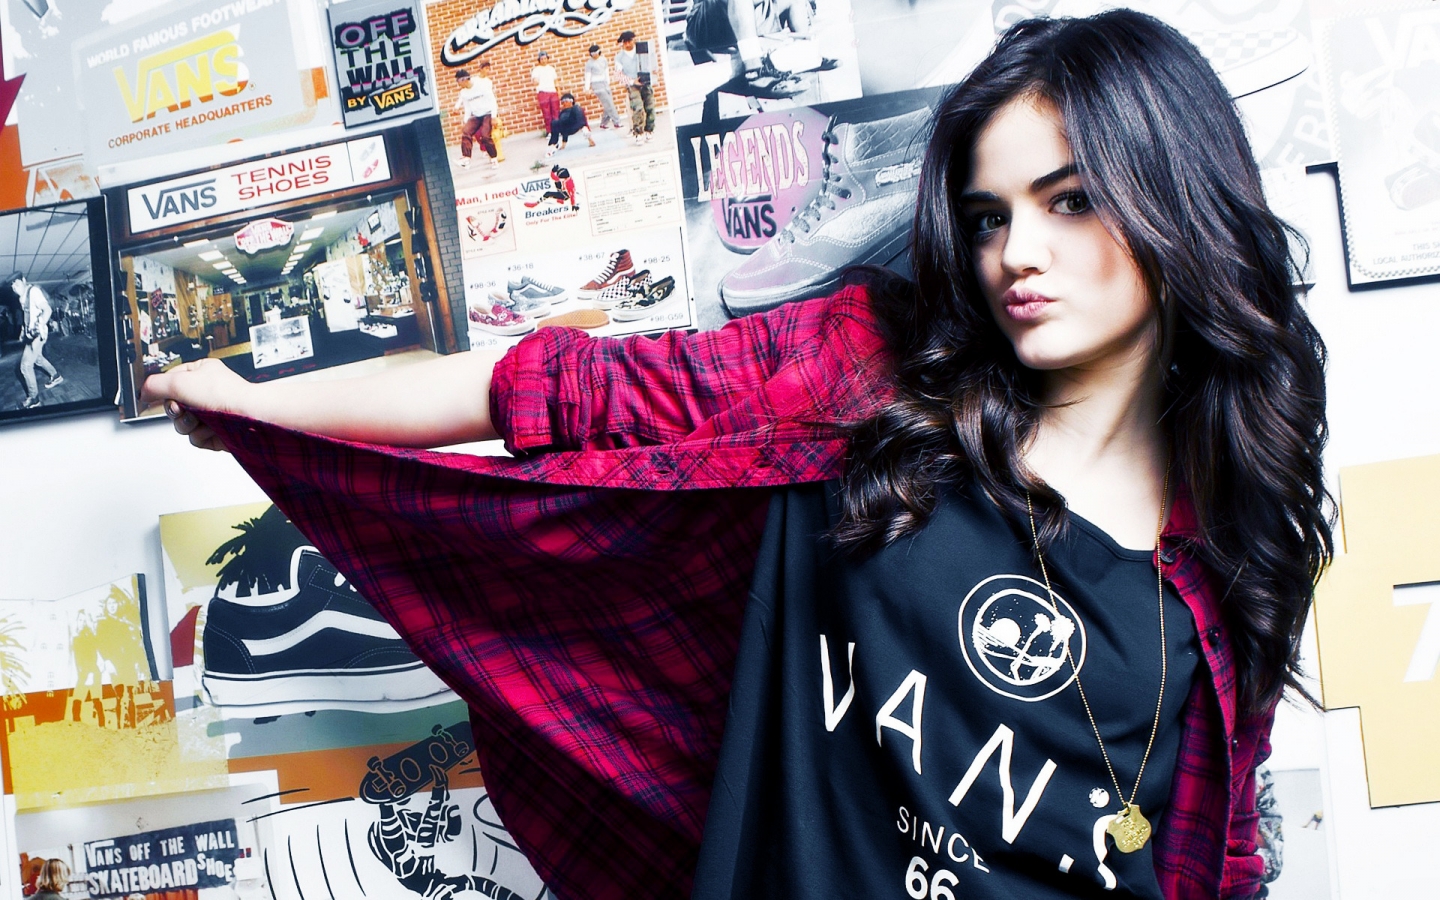 Lucy Hale for 1440 x 900 widescreen resolution